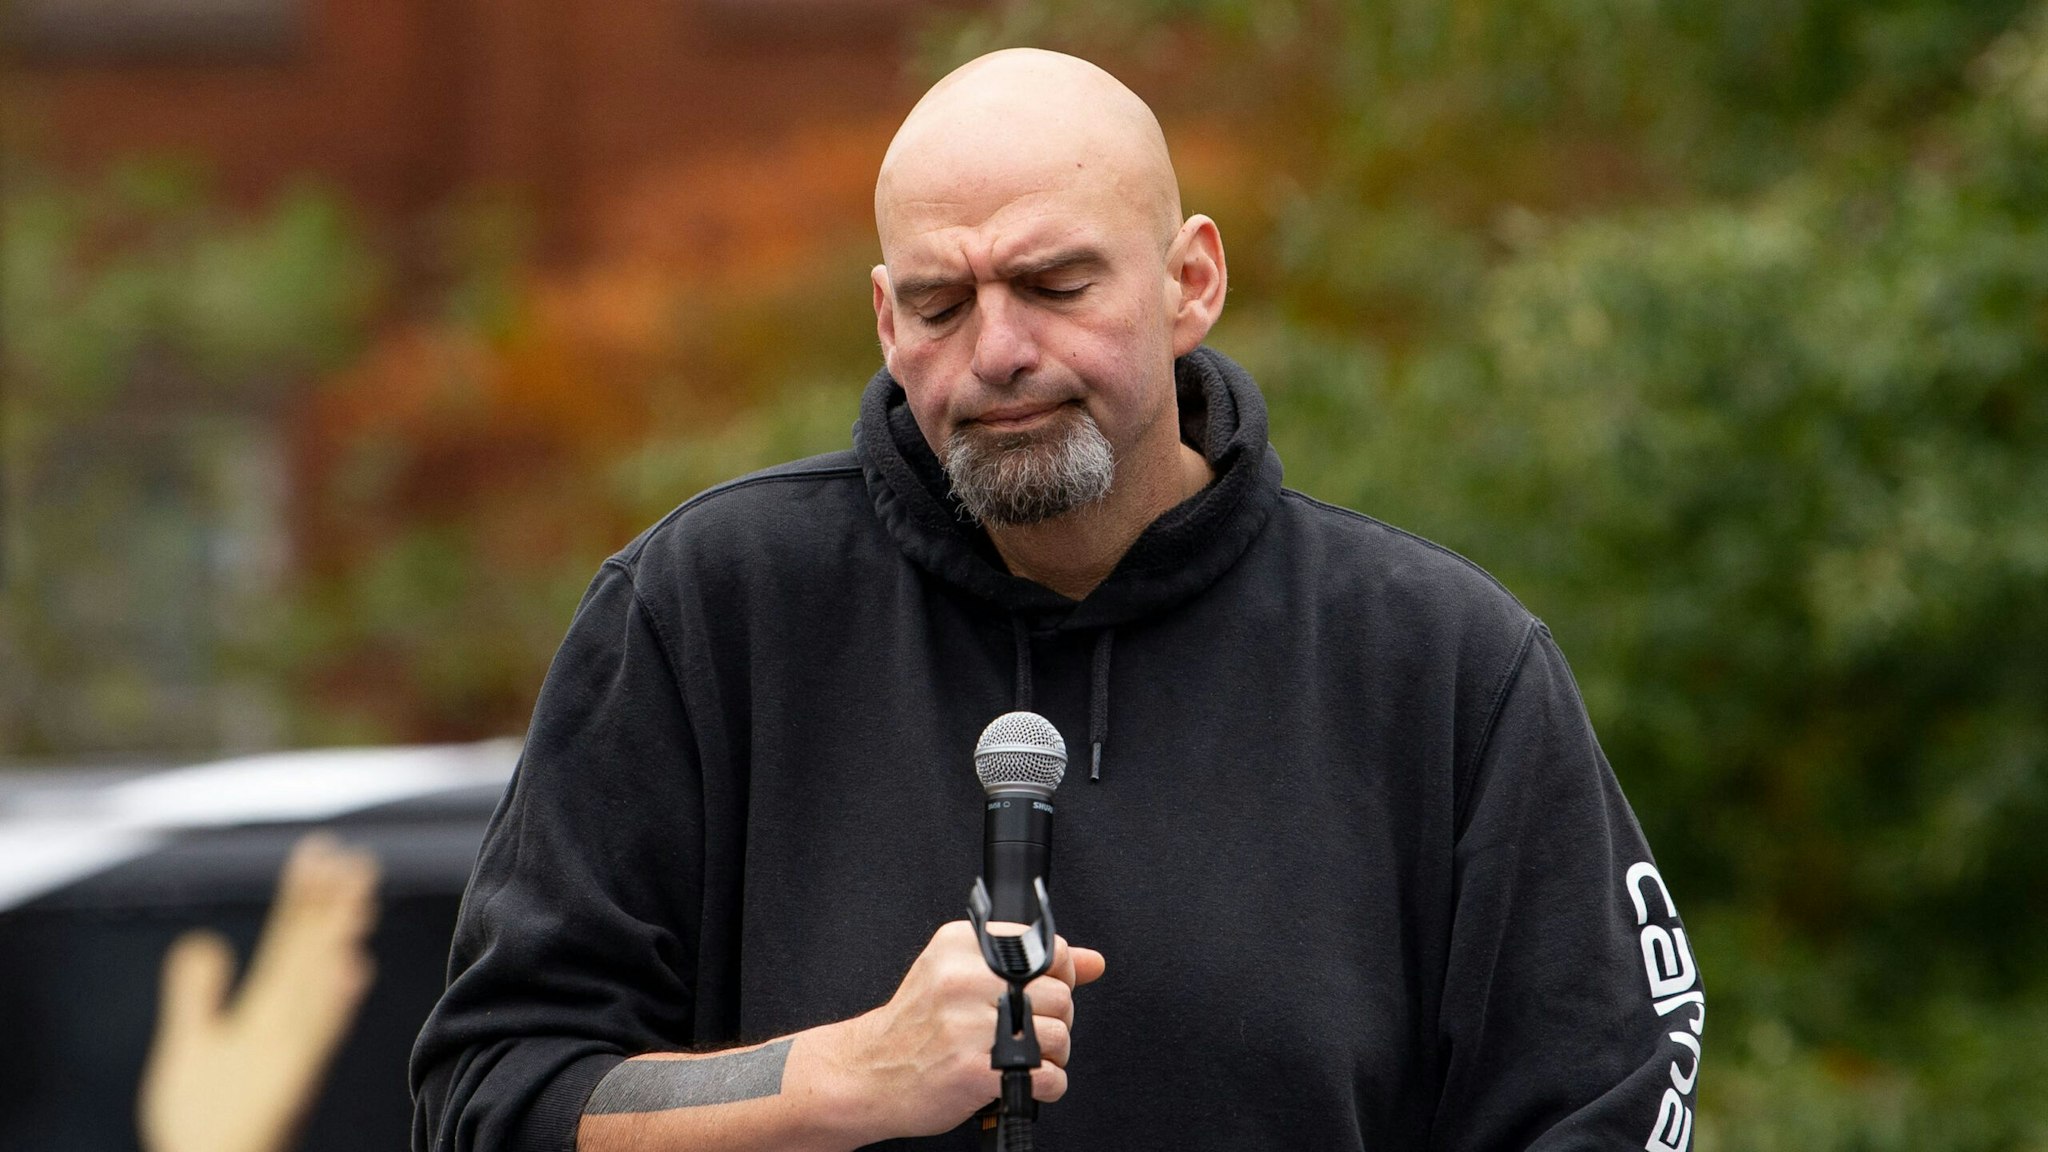 Pennsylvania's Lieutenant Governor John Fetterman speaks to supporters gathered in Dickinson Square Park in Philadelphia on October 23, 2022, as he campaigns for the US Senate. - The US midterm election is scheduled for November 8, 2022.